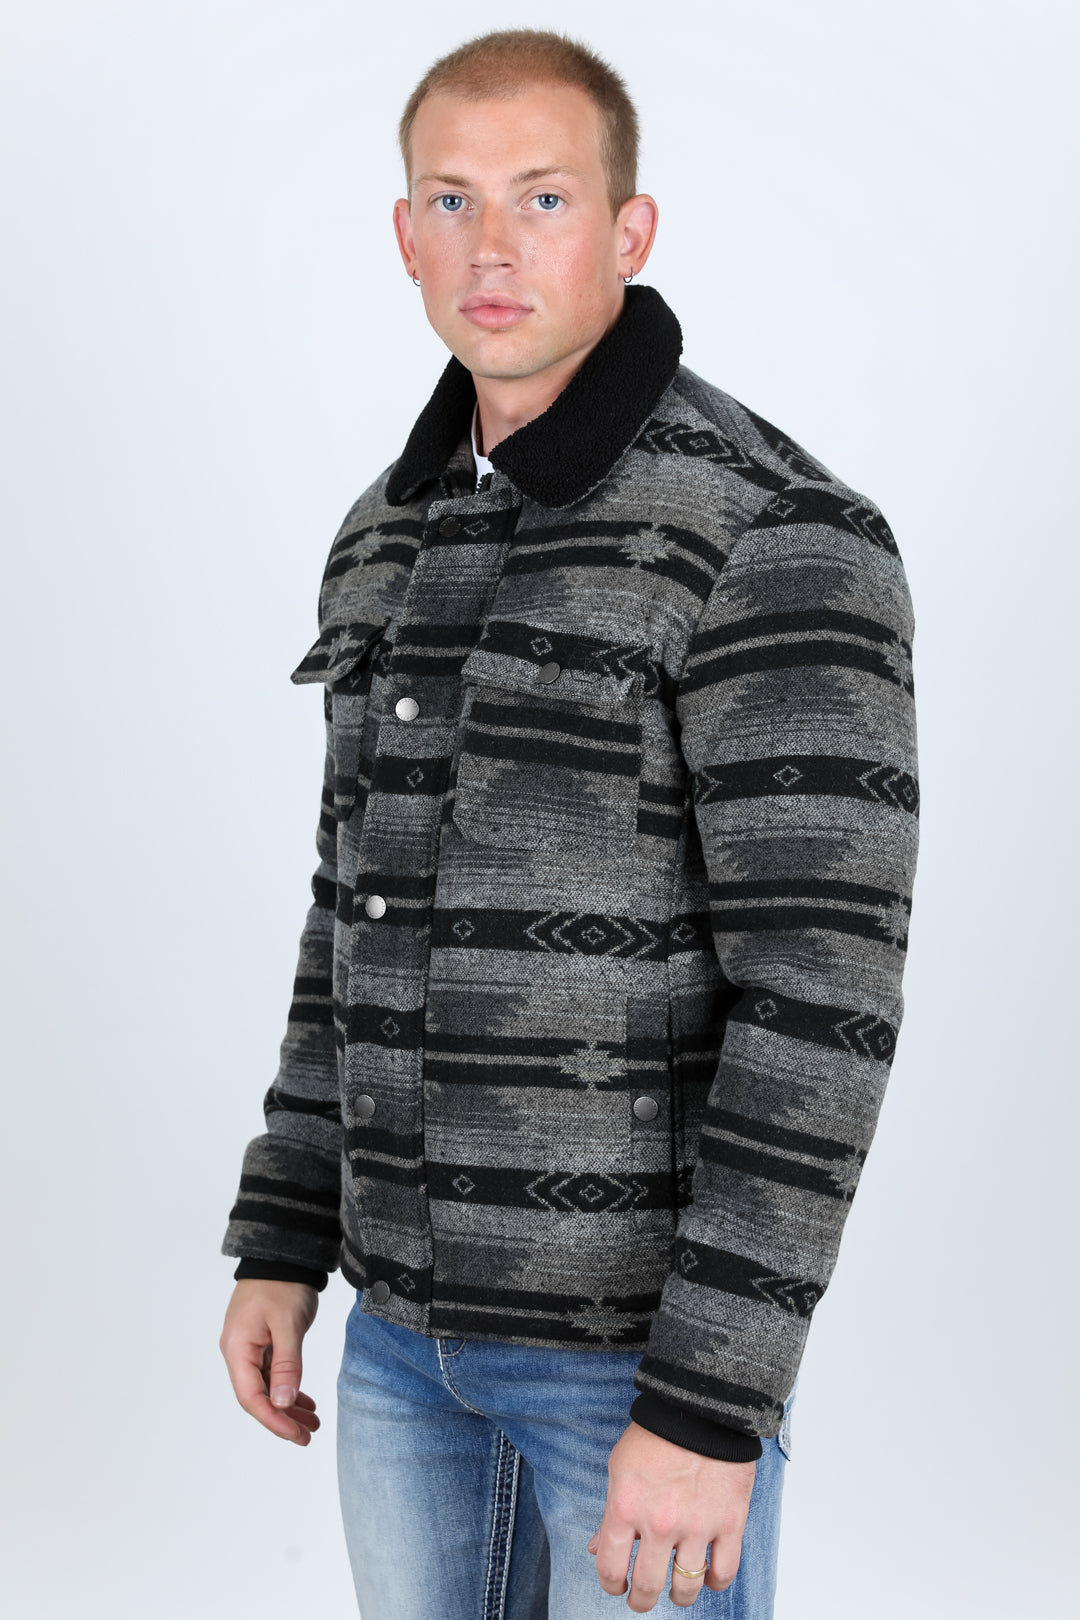 Mens Ethnic Aztec Quilted Fur Lined Jacket - Black